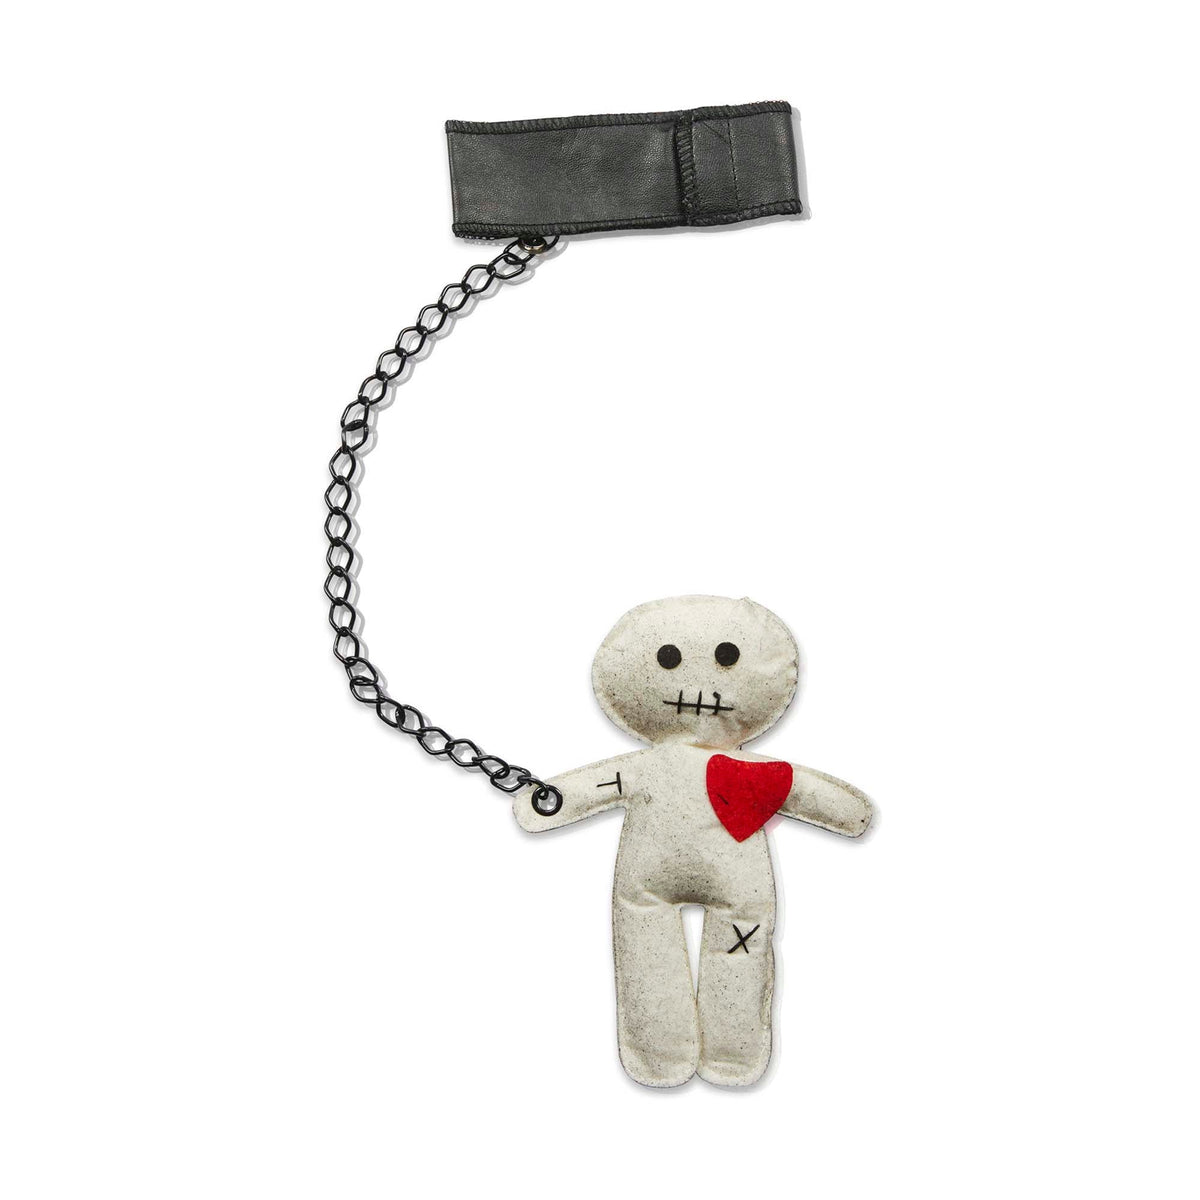 Seeing Red Inc. Costumes Accessories Voodoo Doll Wristlet, 1 Count